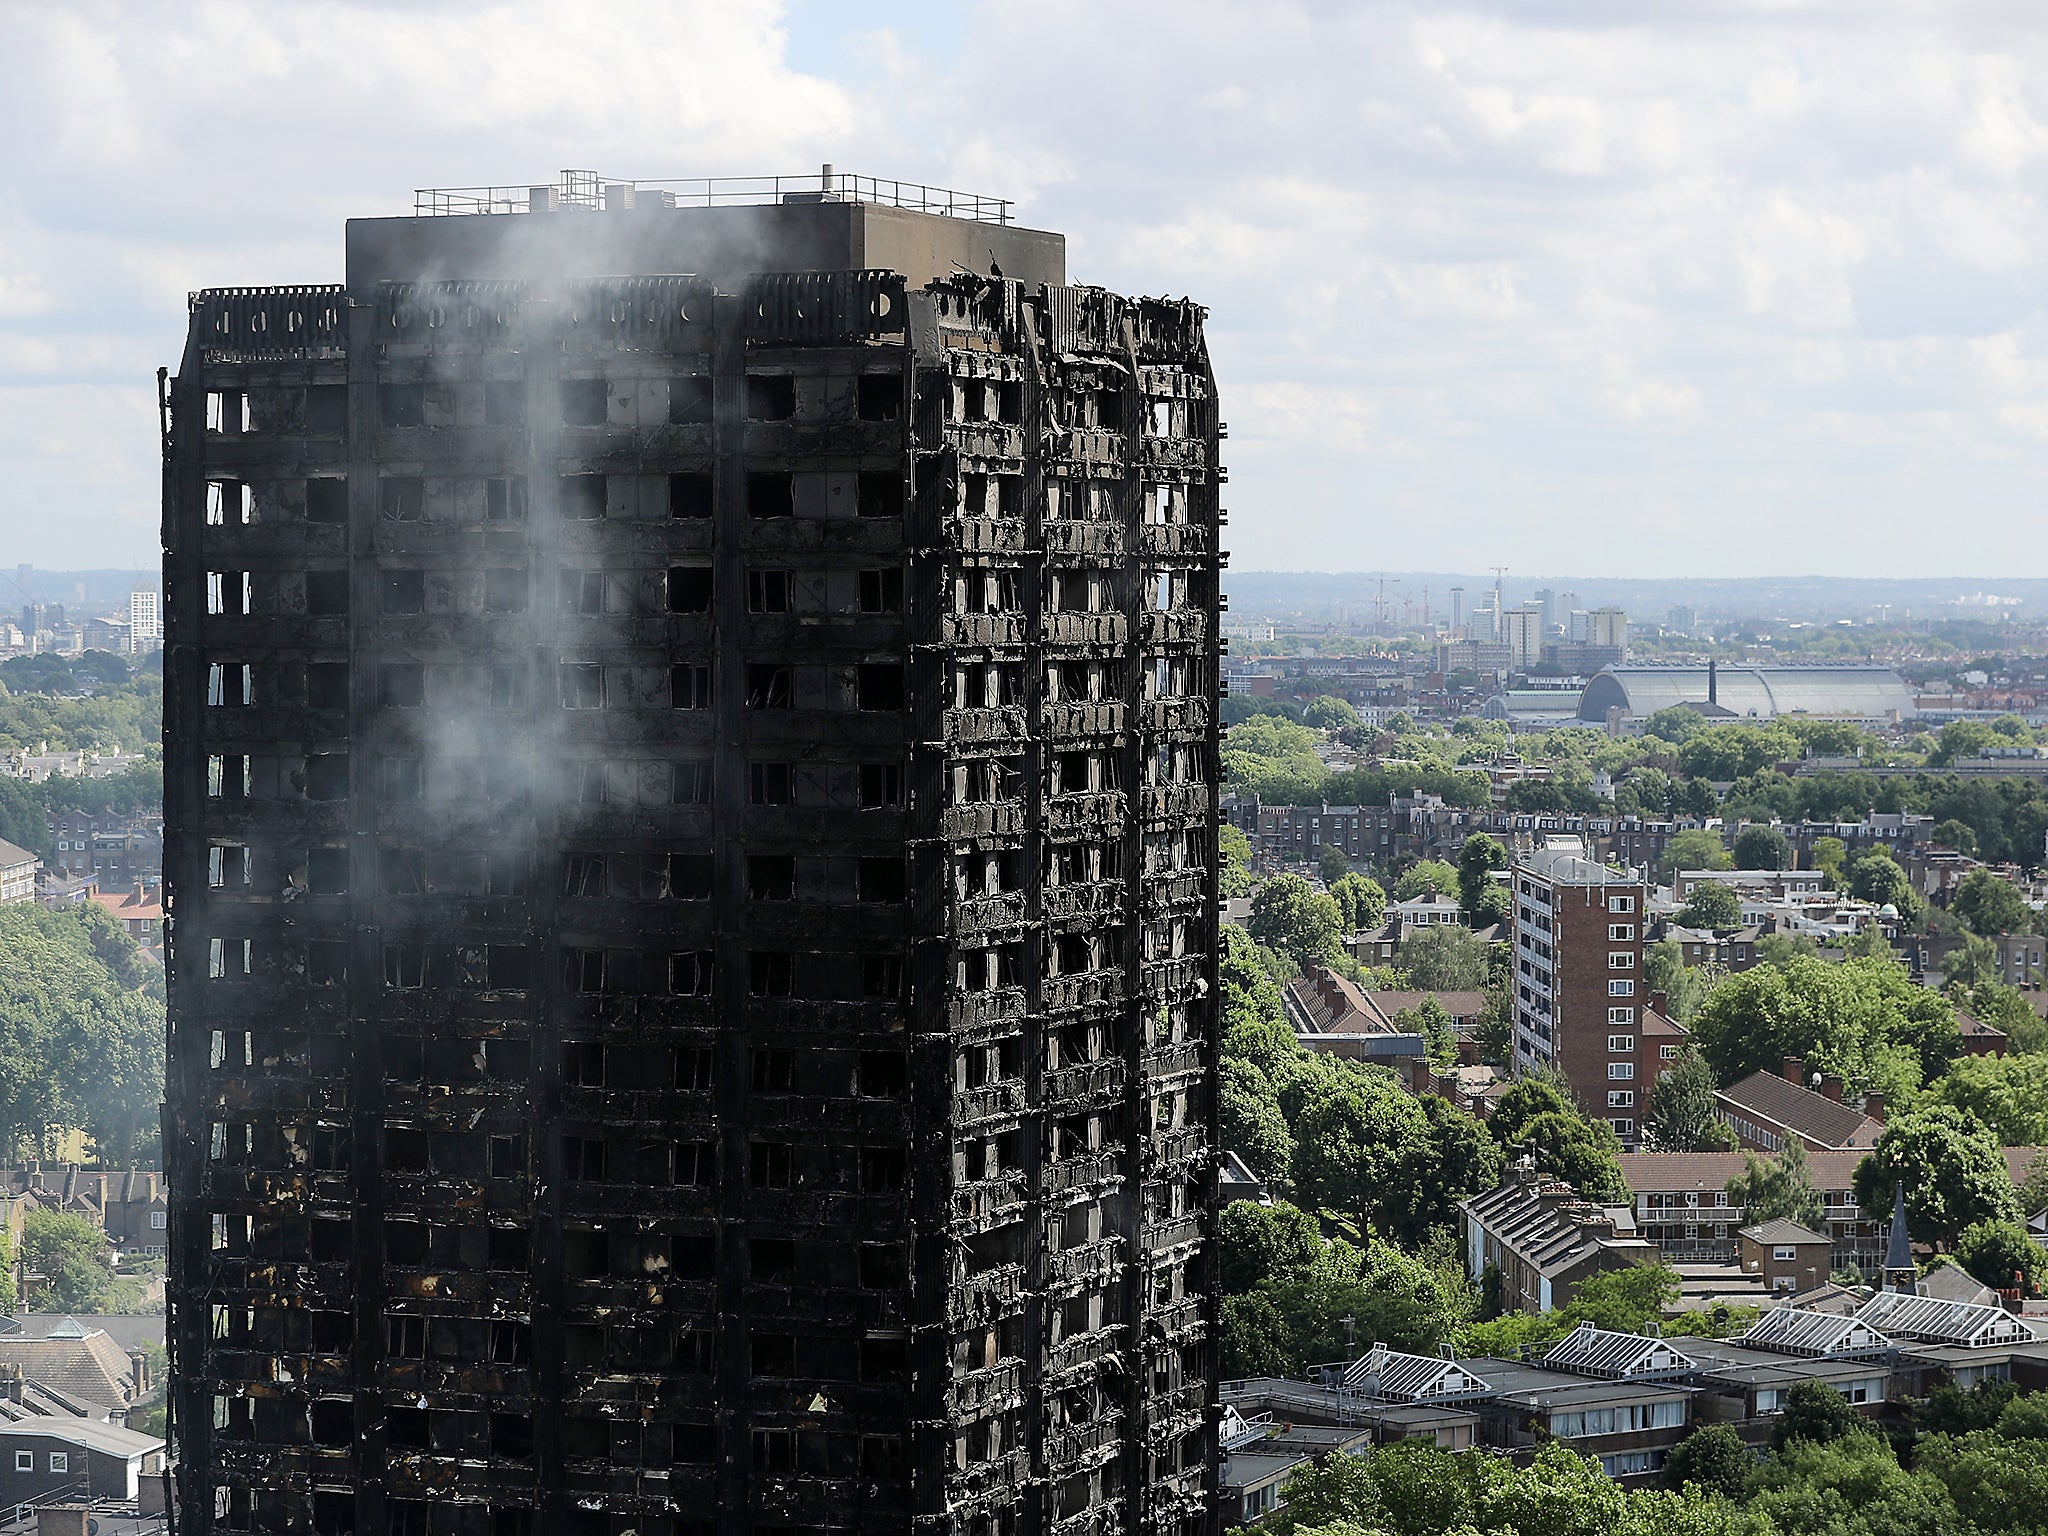 Debris hangs from the blackened exterior of Grenfell Tower